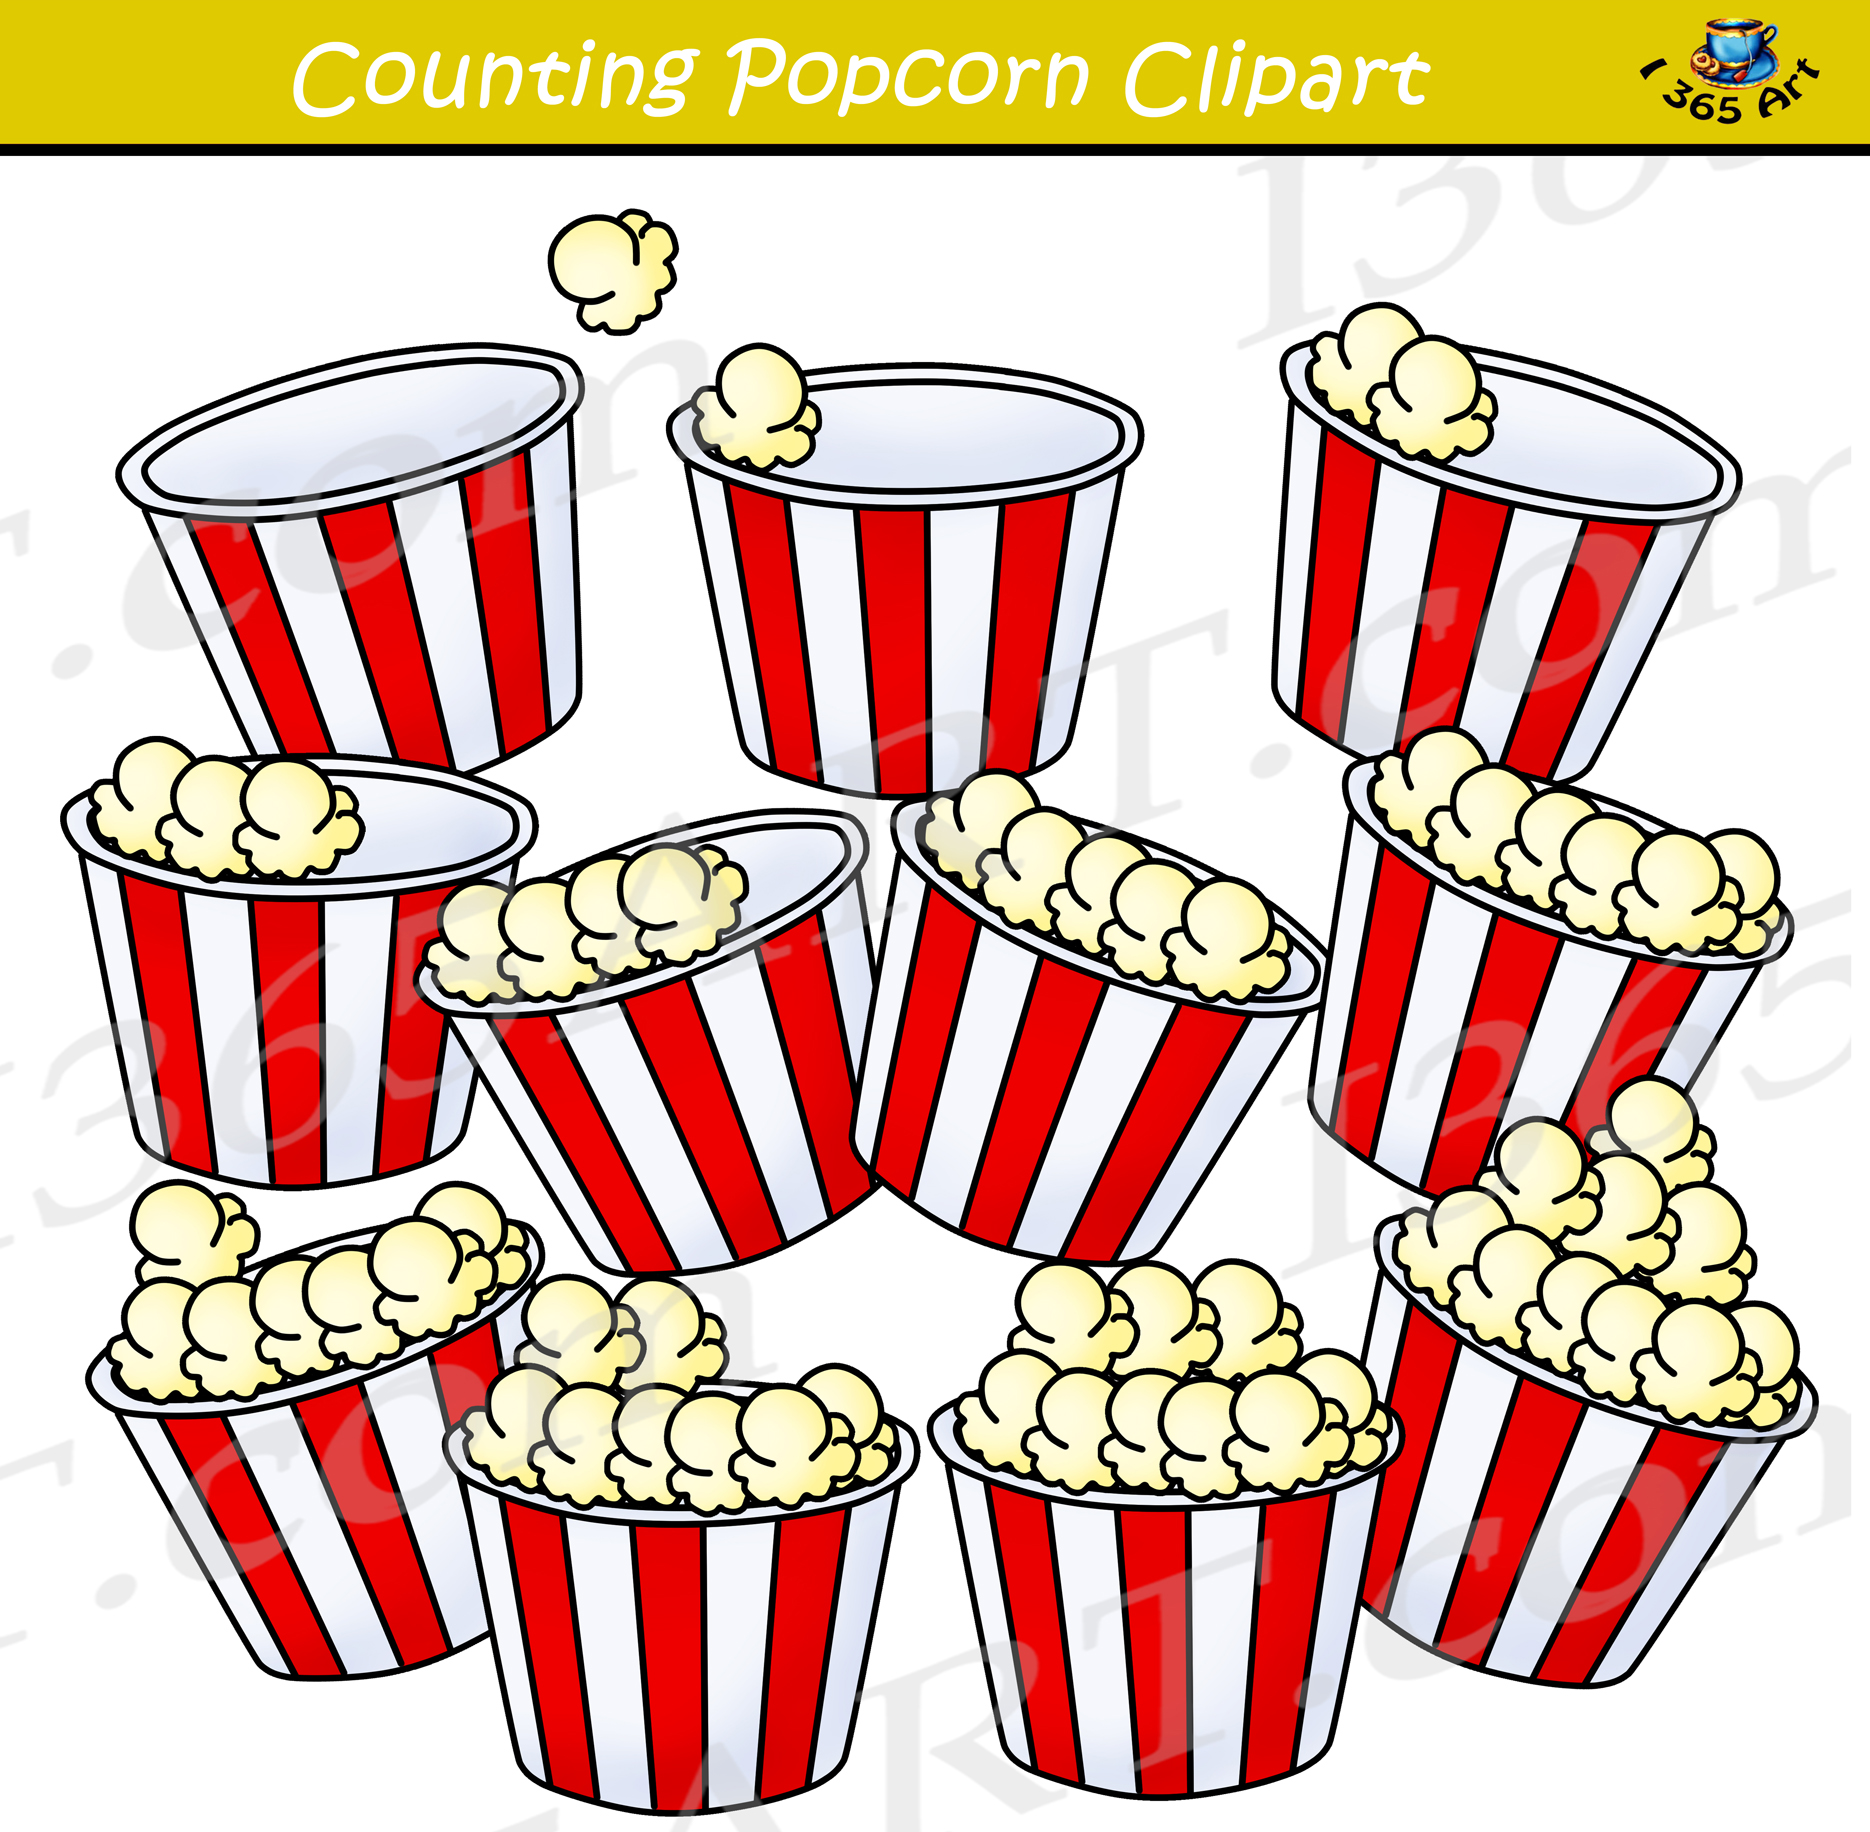 counting popcorn clipart.